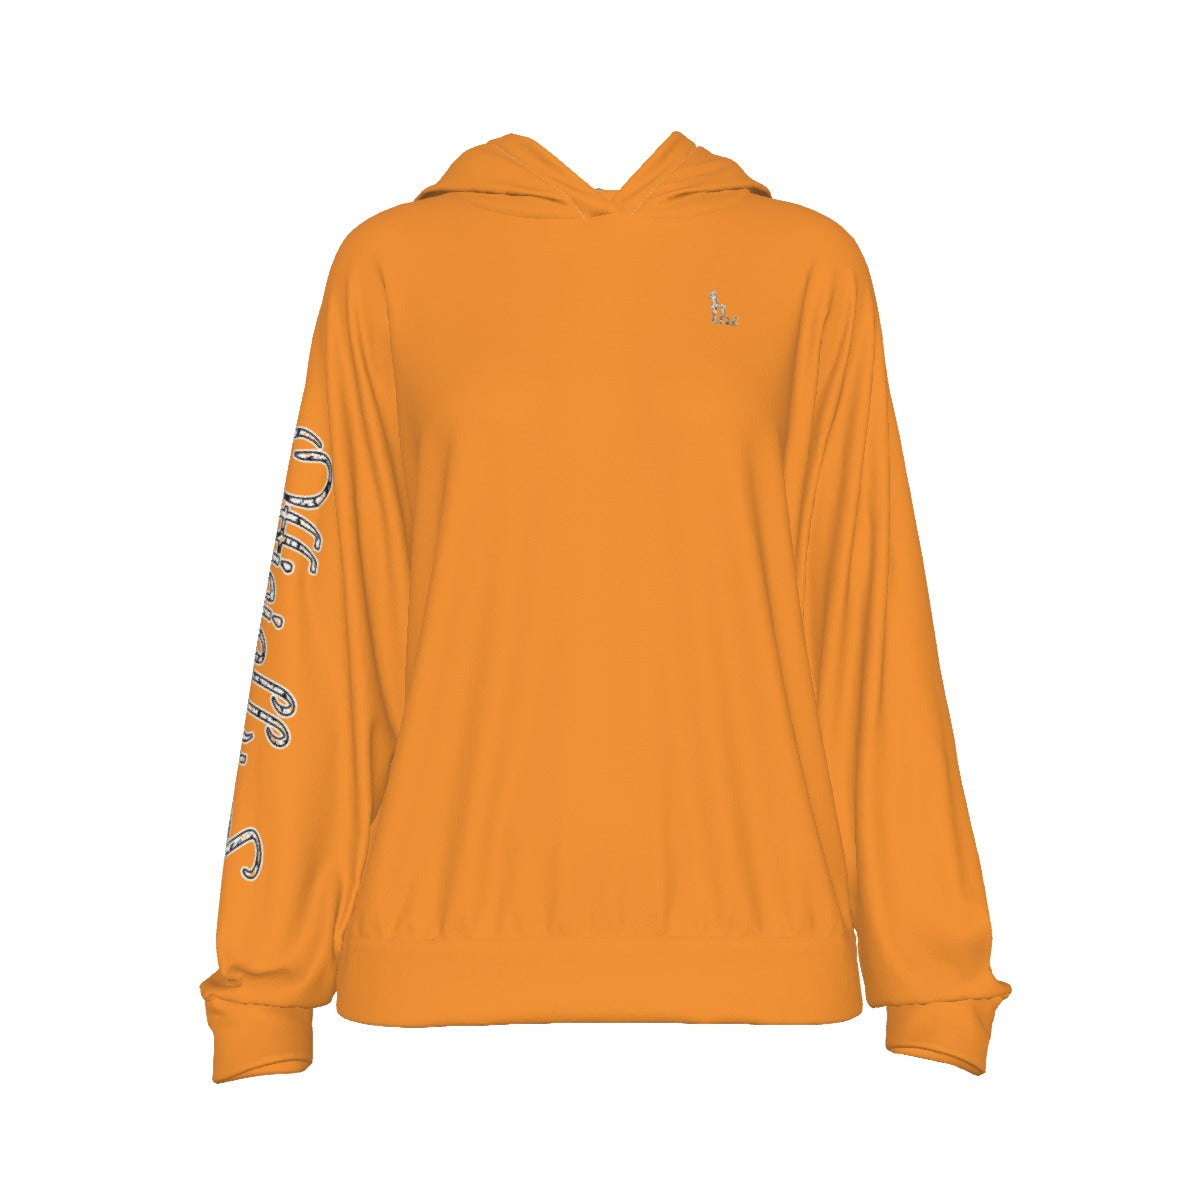 Officially Sexy Halloween Collection Black and Orange Bat Women's Orange Casual Hoodie #1 (English) 1